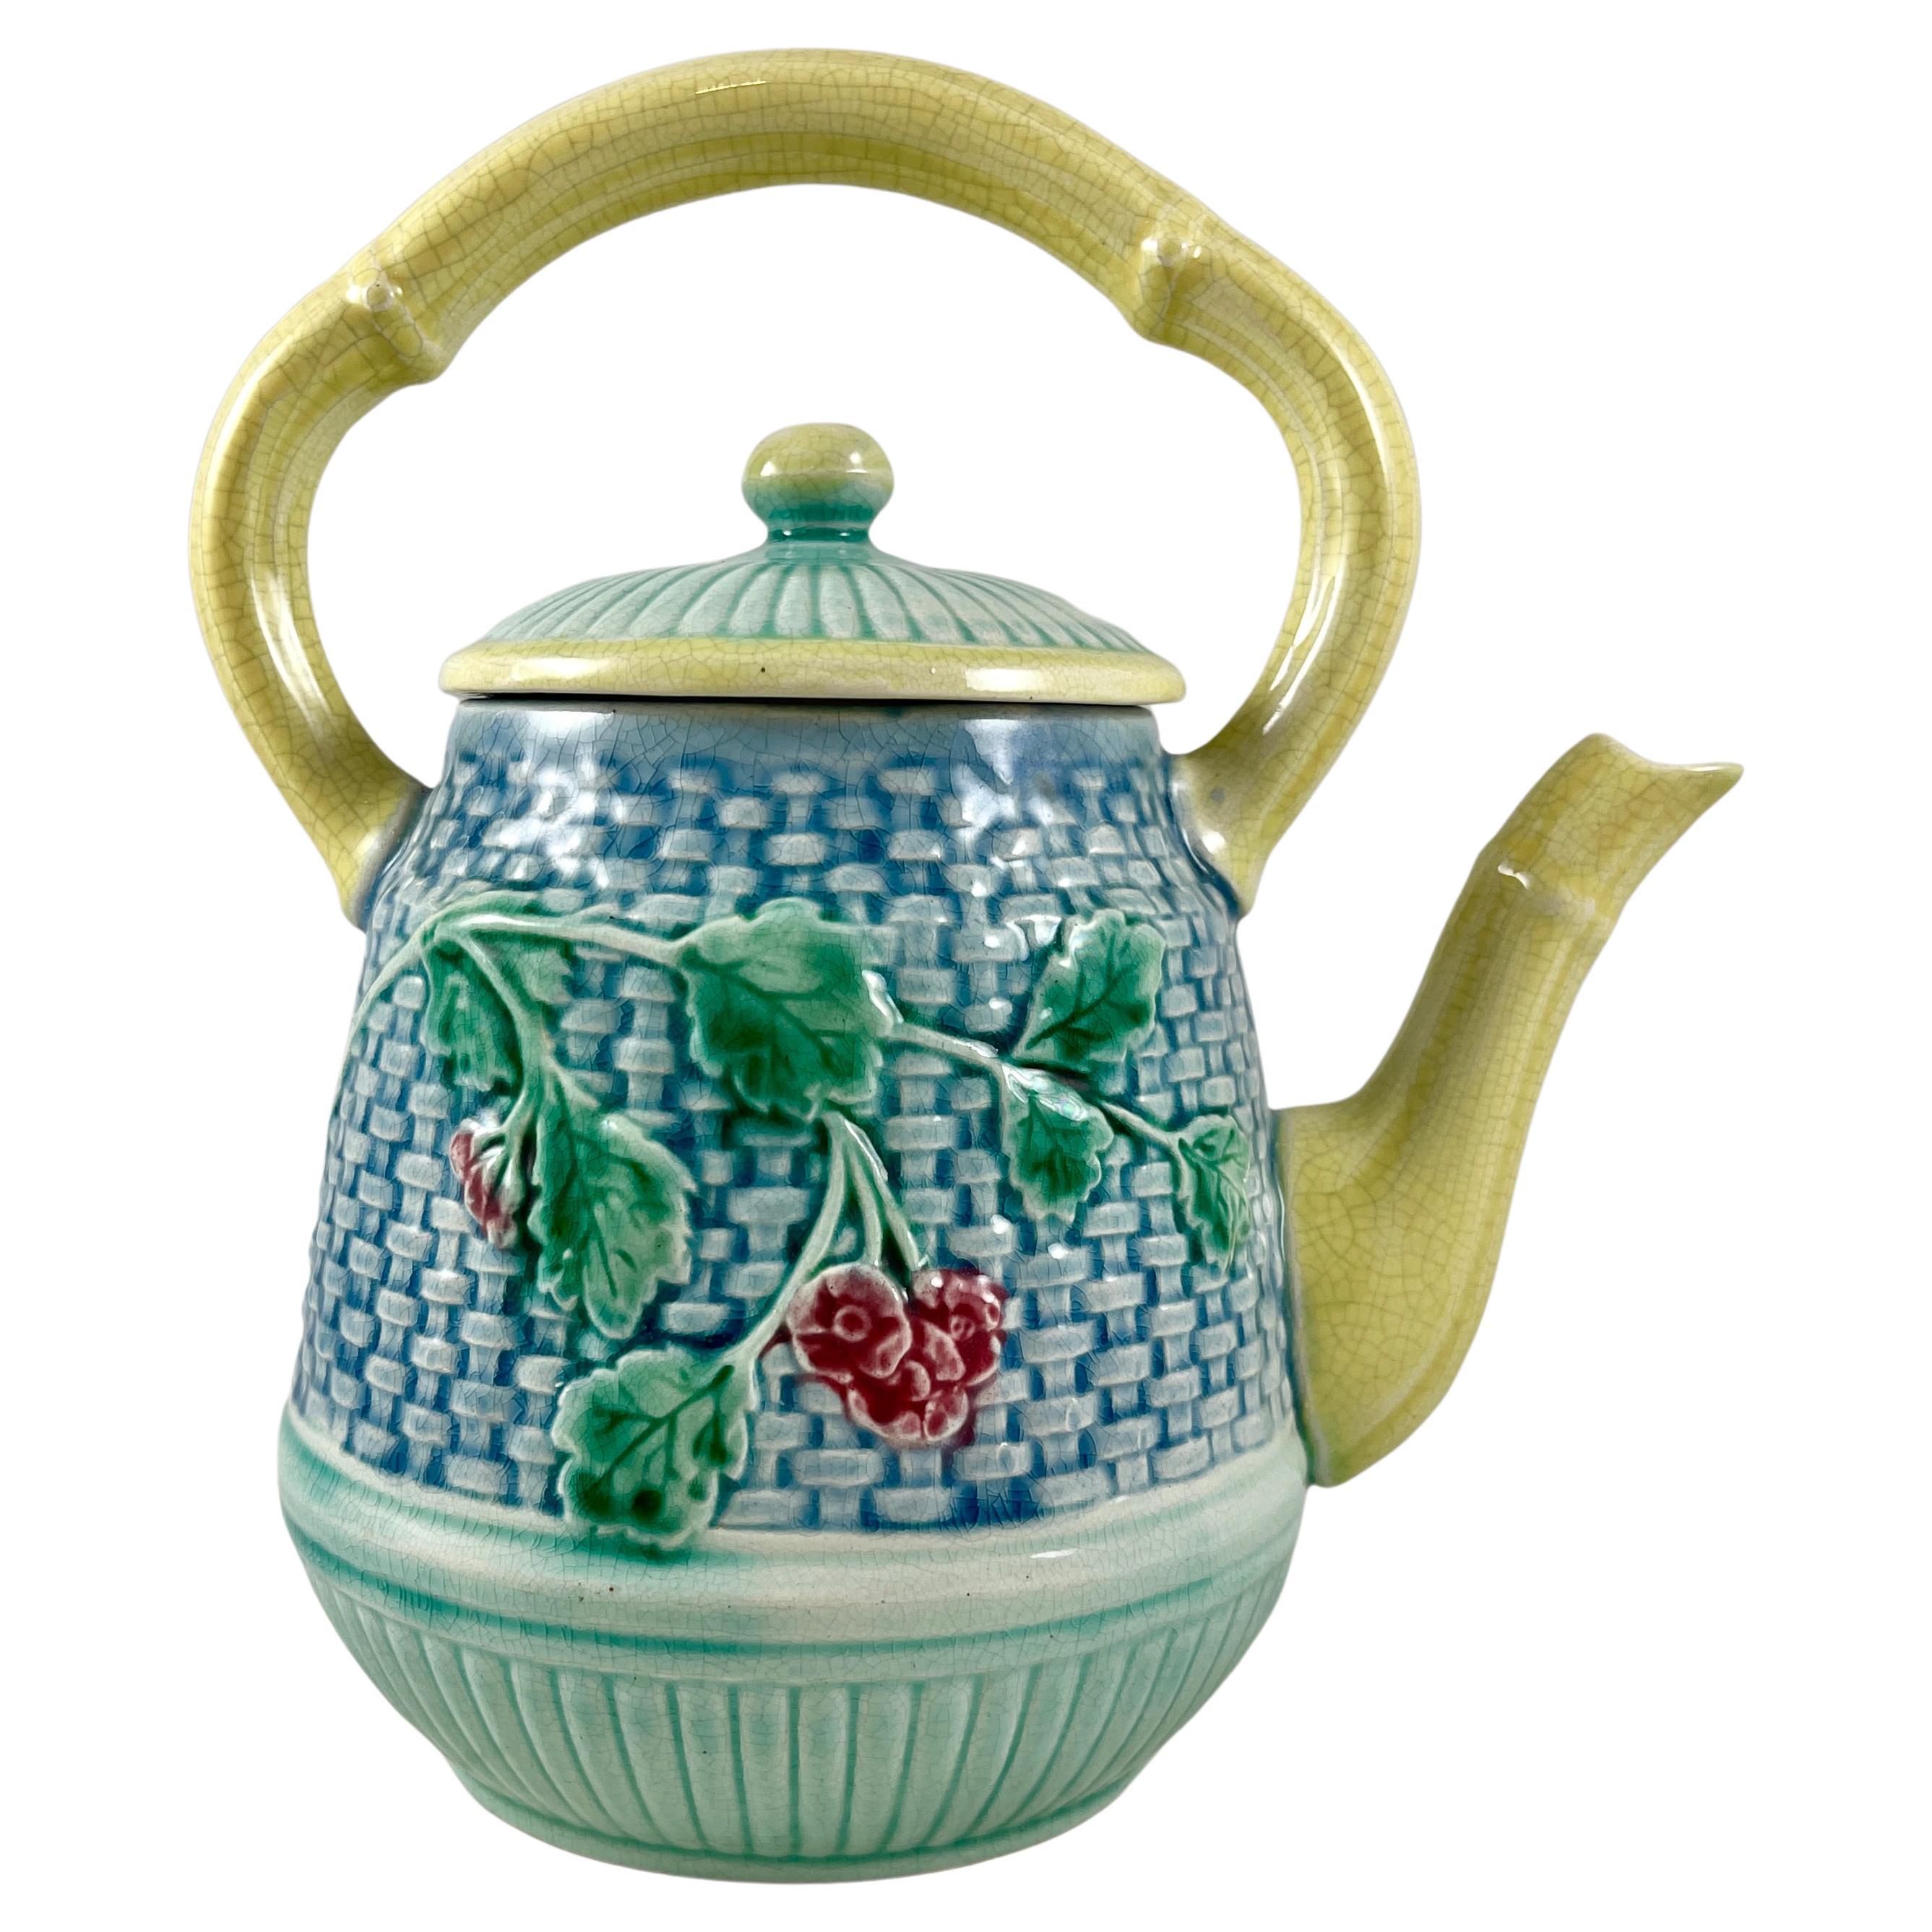 19th Century English Majolica Basketweave and Floral Tea Kettle